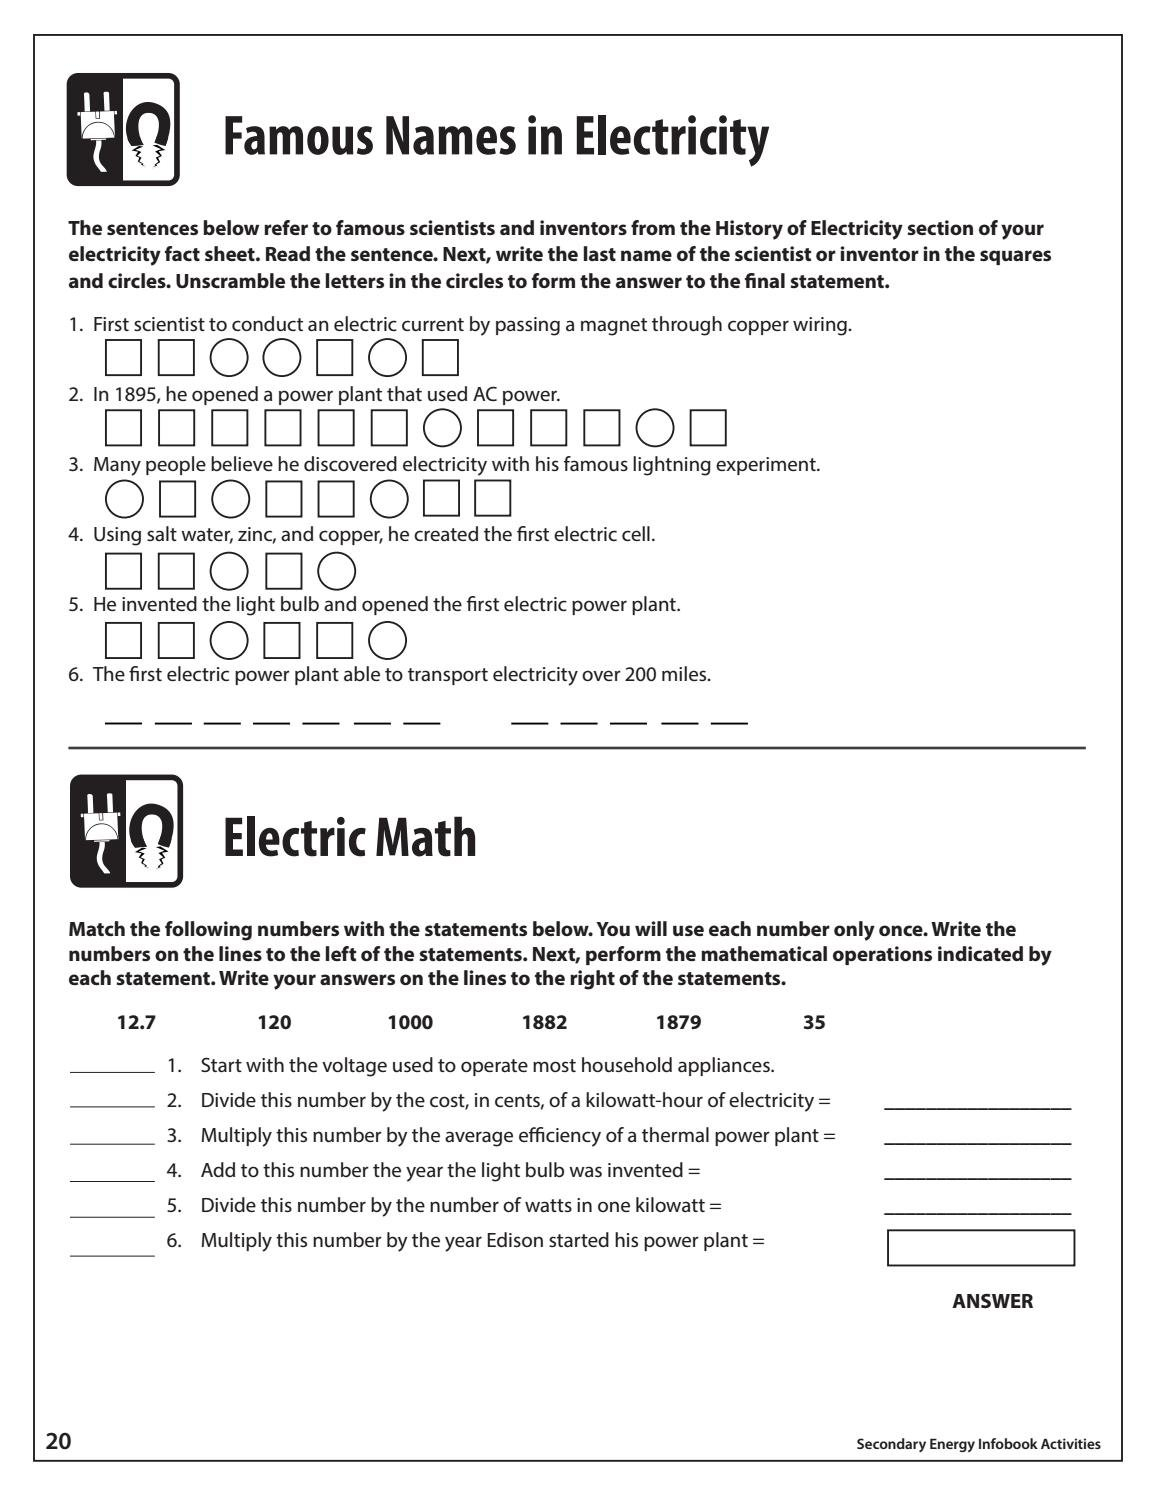 Secondary Energy Infobook Activitiesneed Project  Issuu And Famous Names In Electricity Worksheet Answers